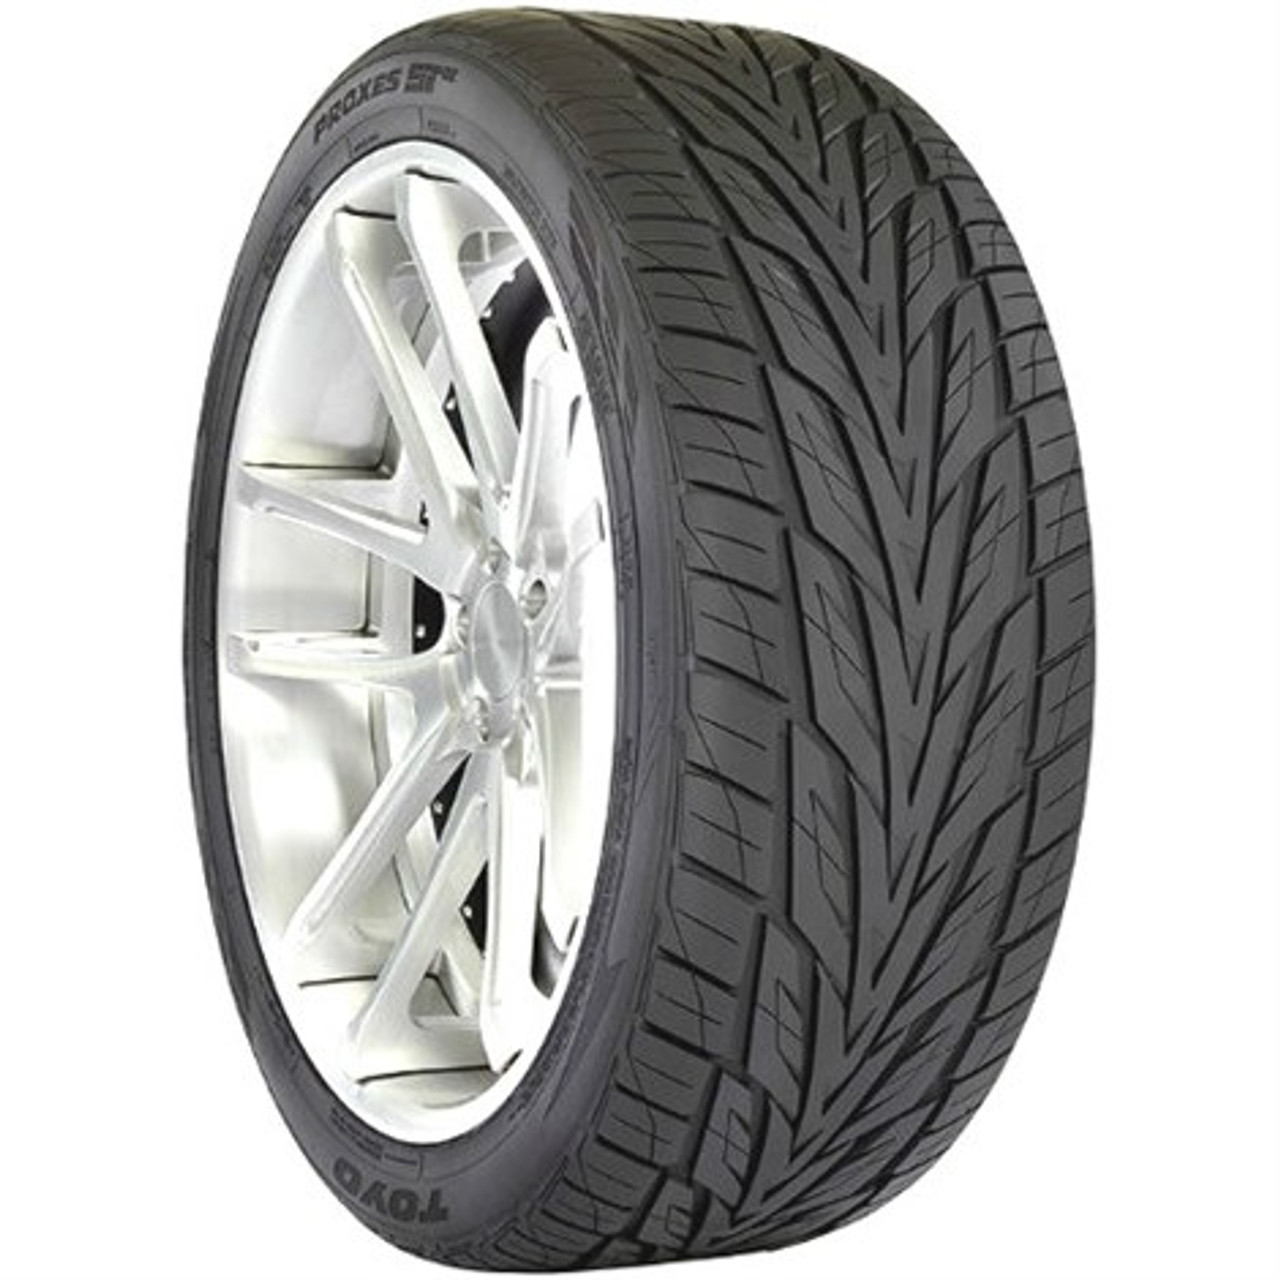 Toyo Proxes ST III Tire - 235/55R20